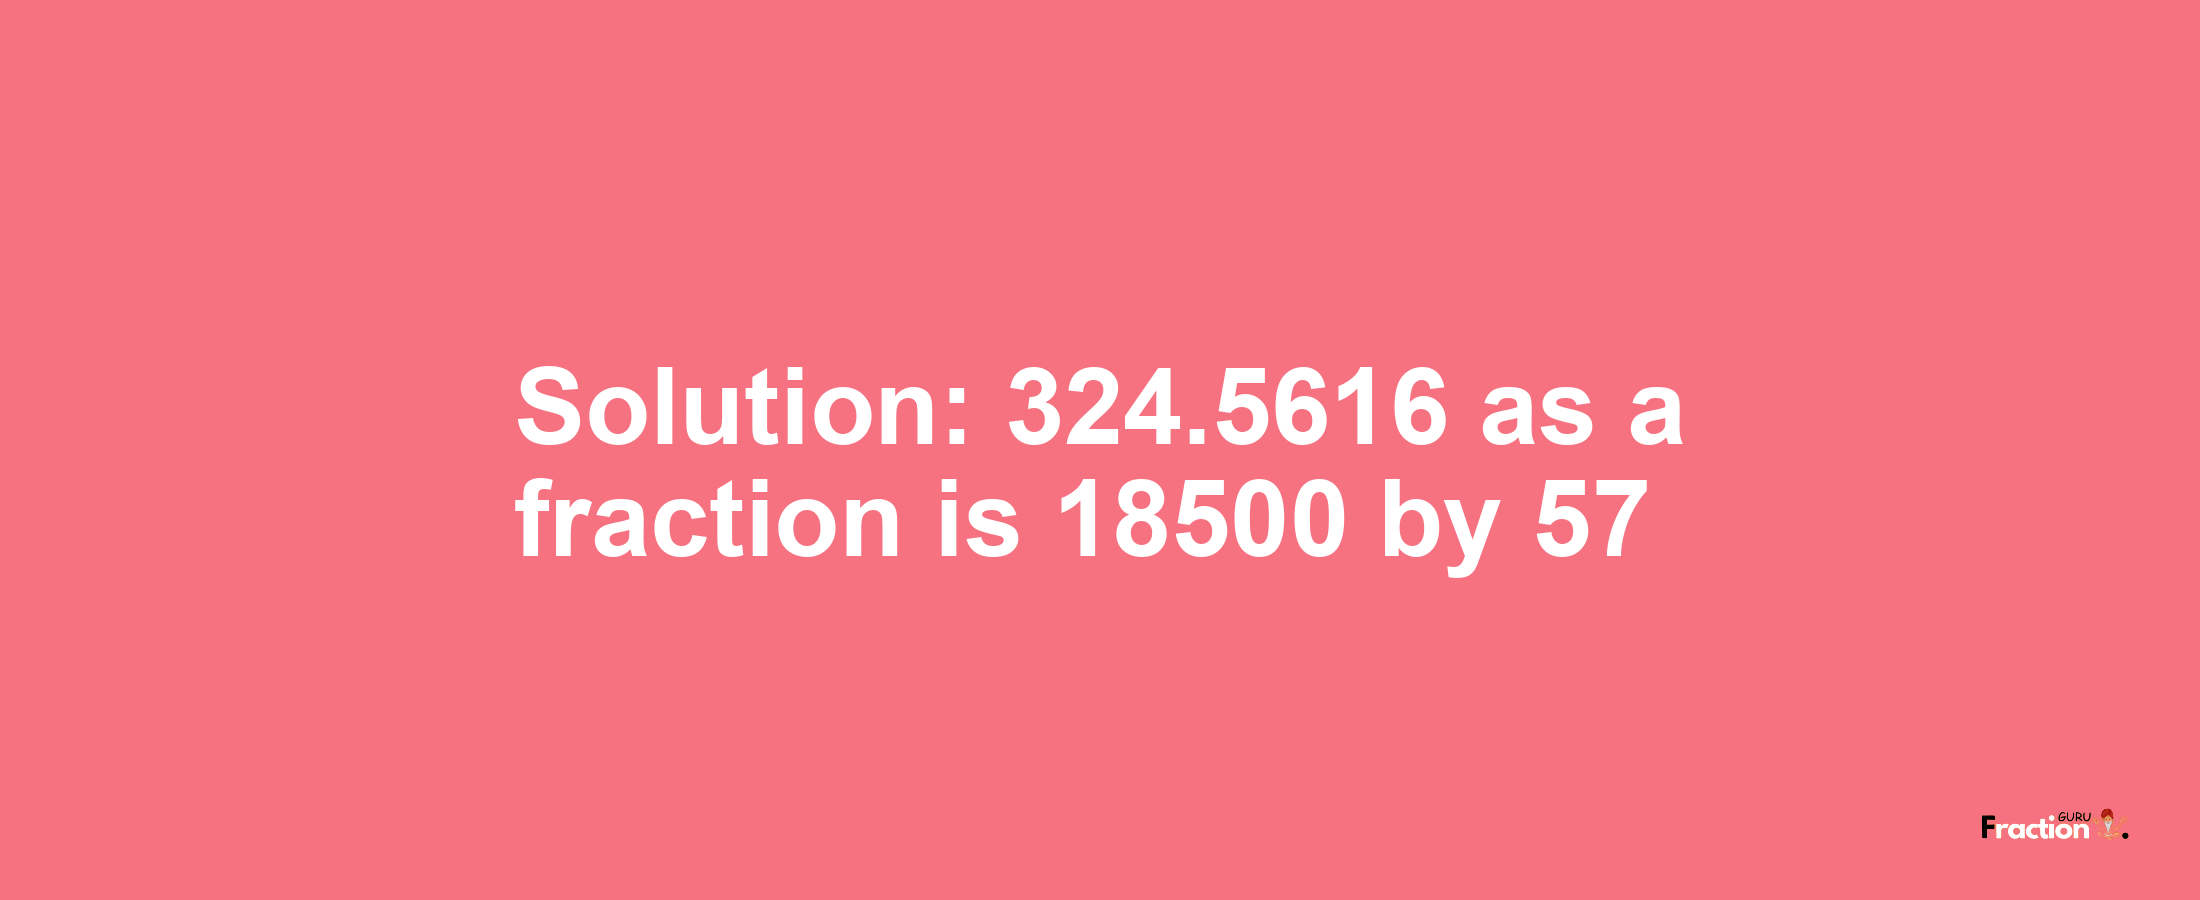 Solution:324.5616 as a fraction is 18500/57